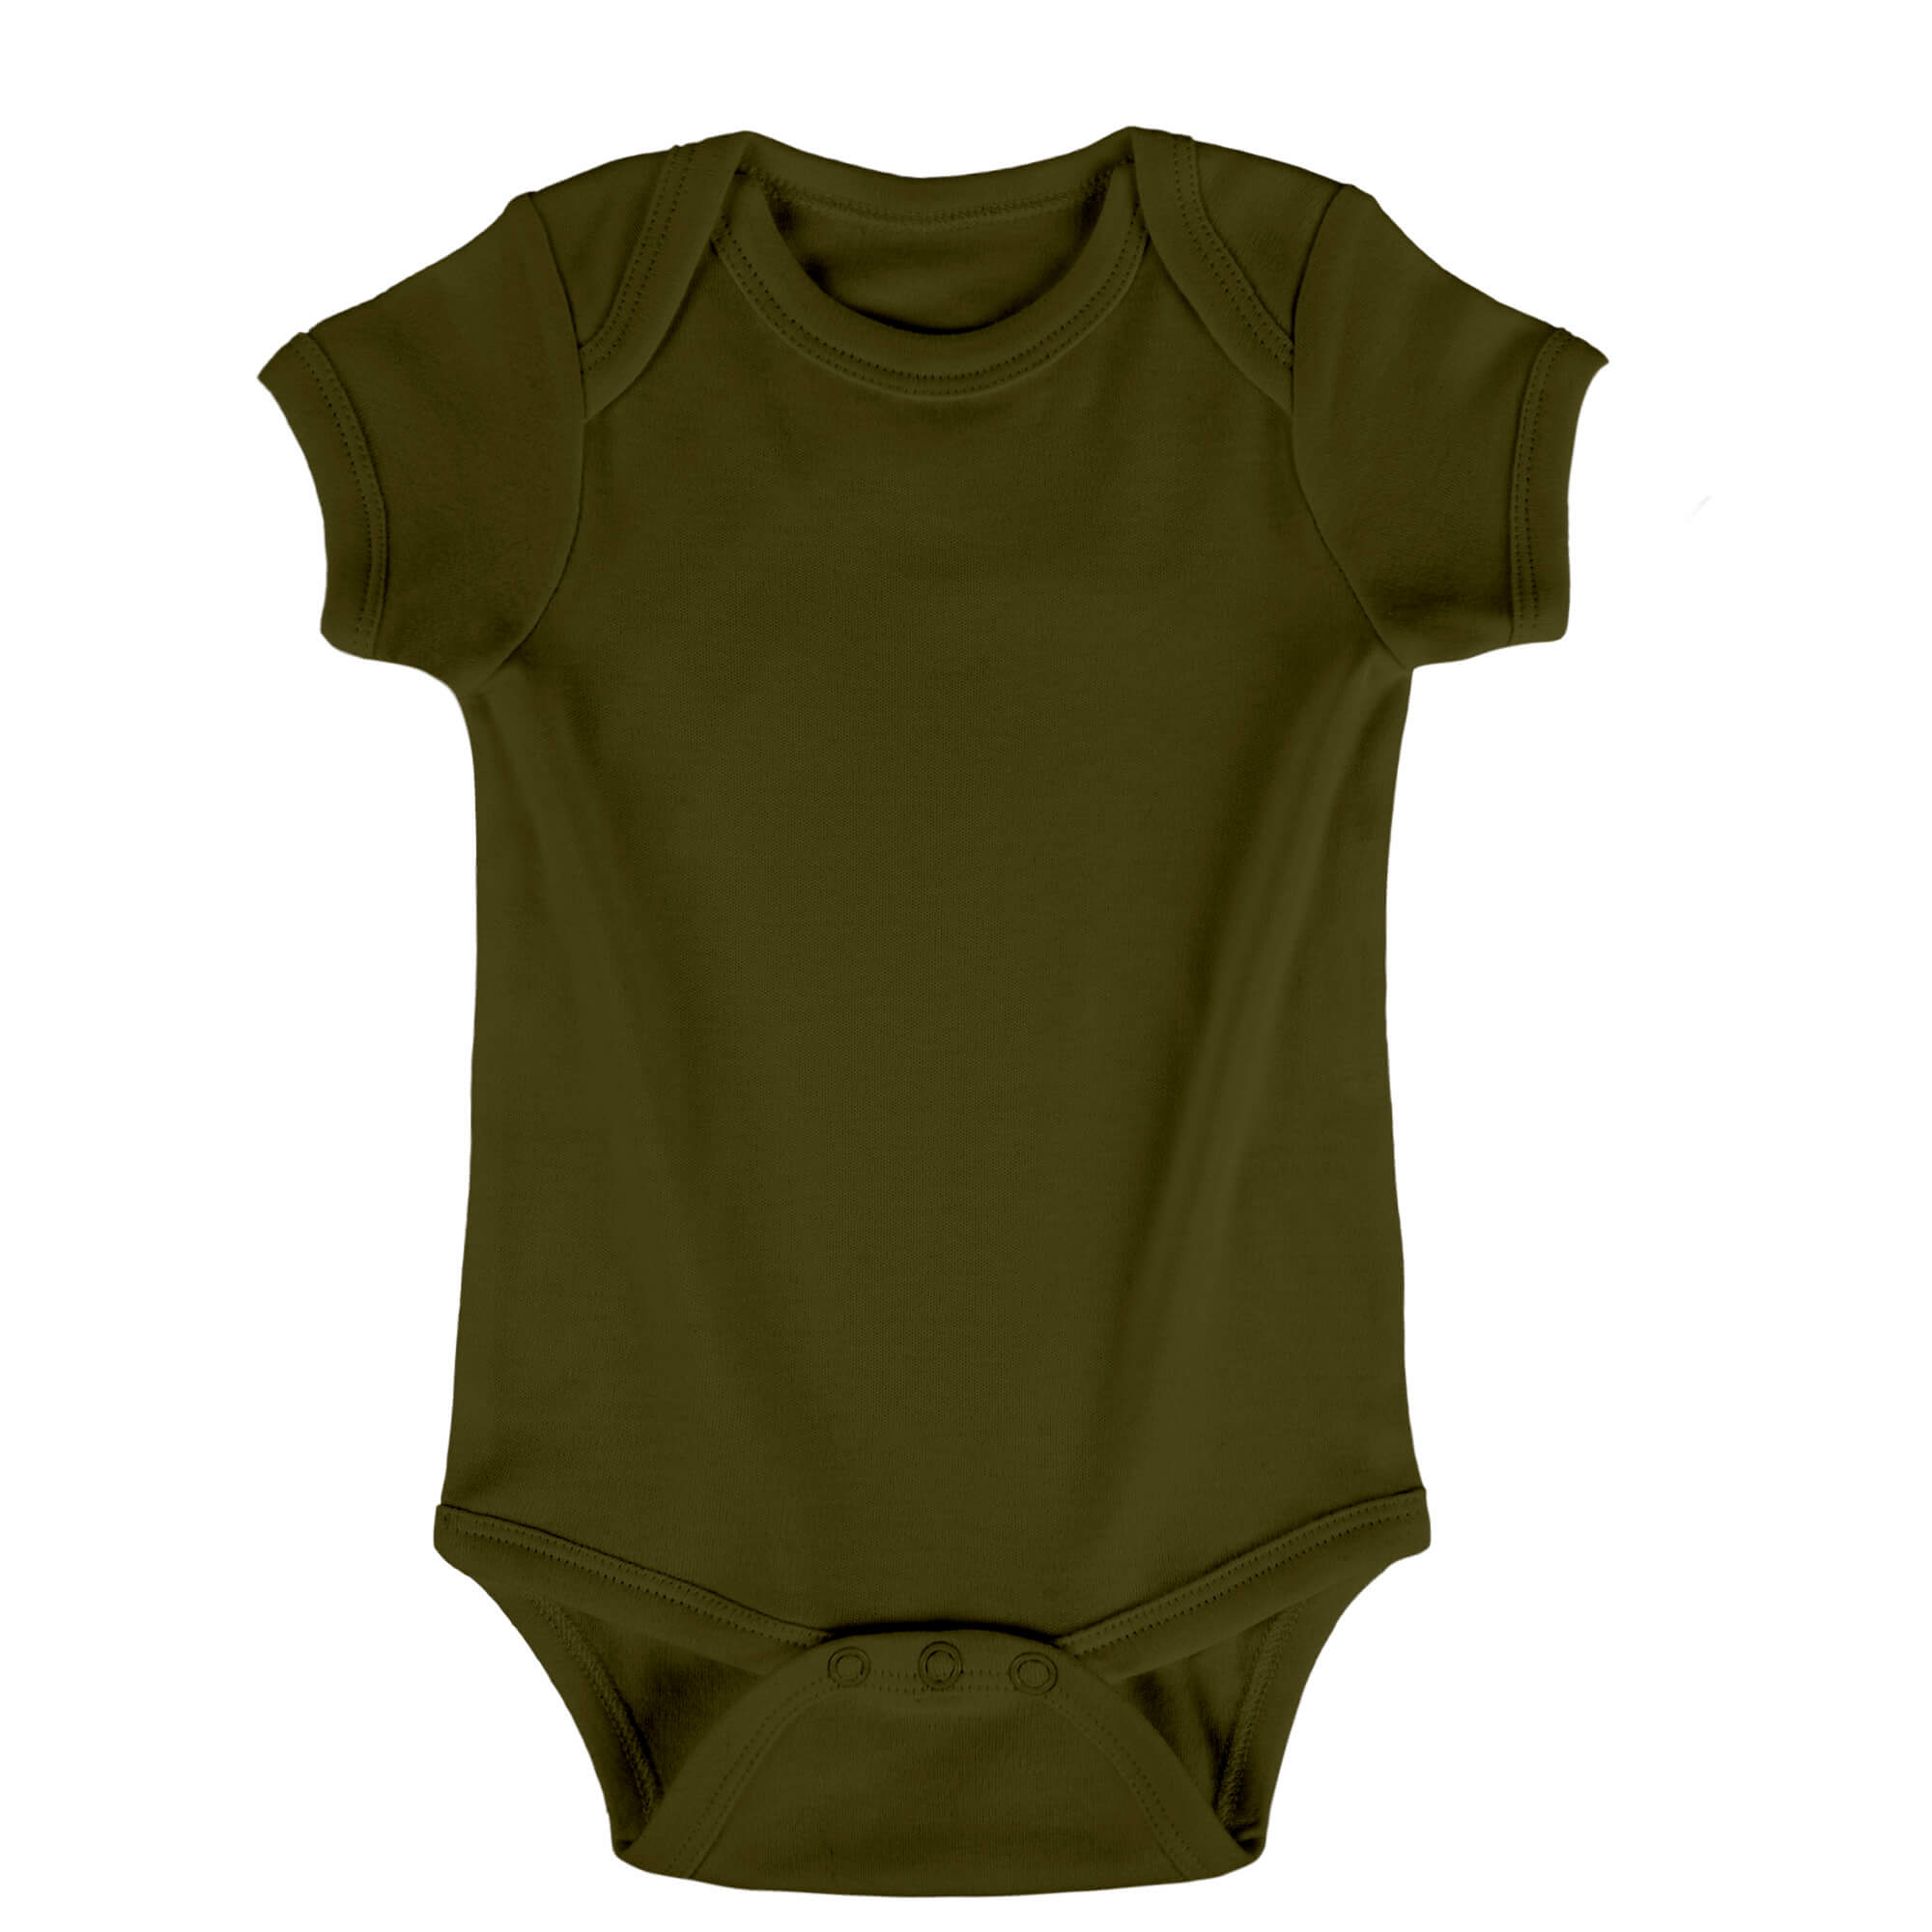 military green color number #58, onesie color selection, and color display.